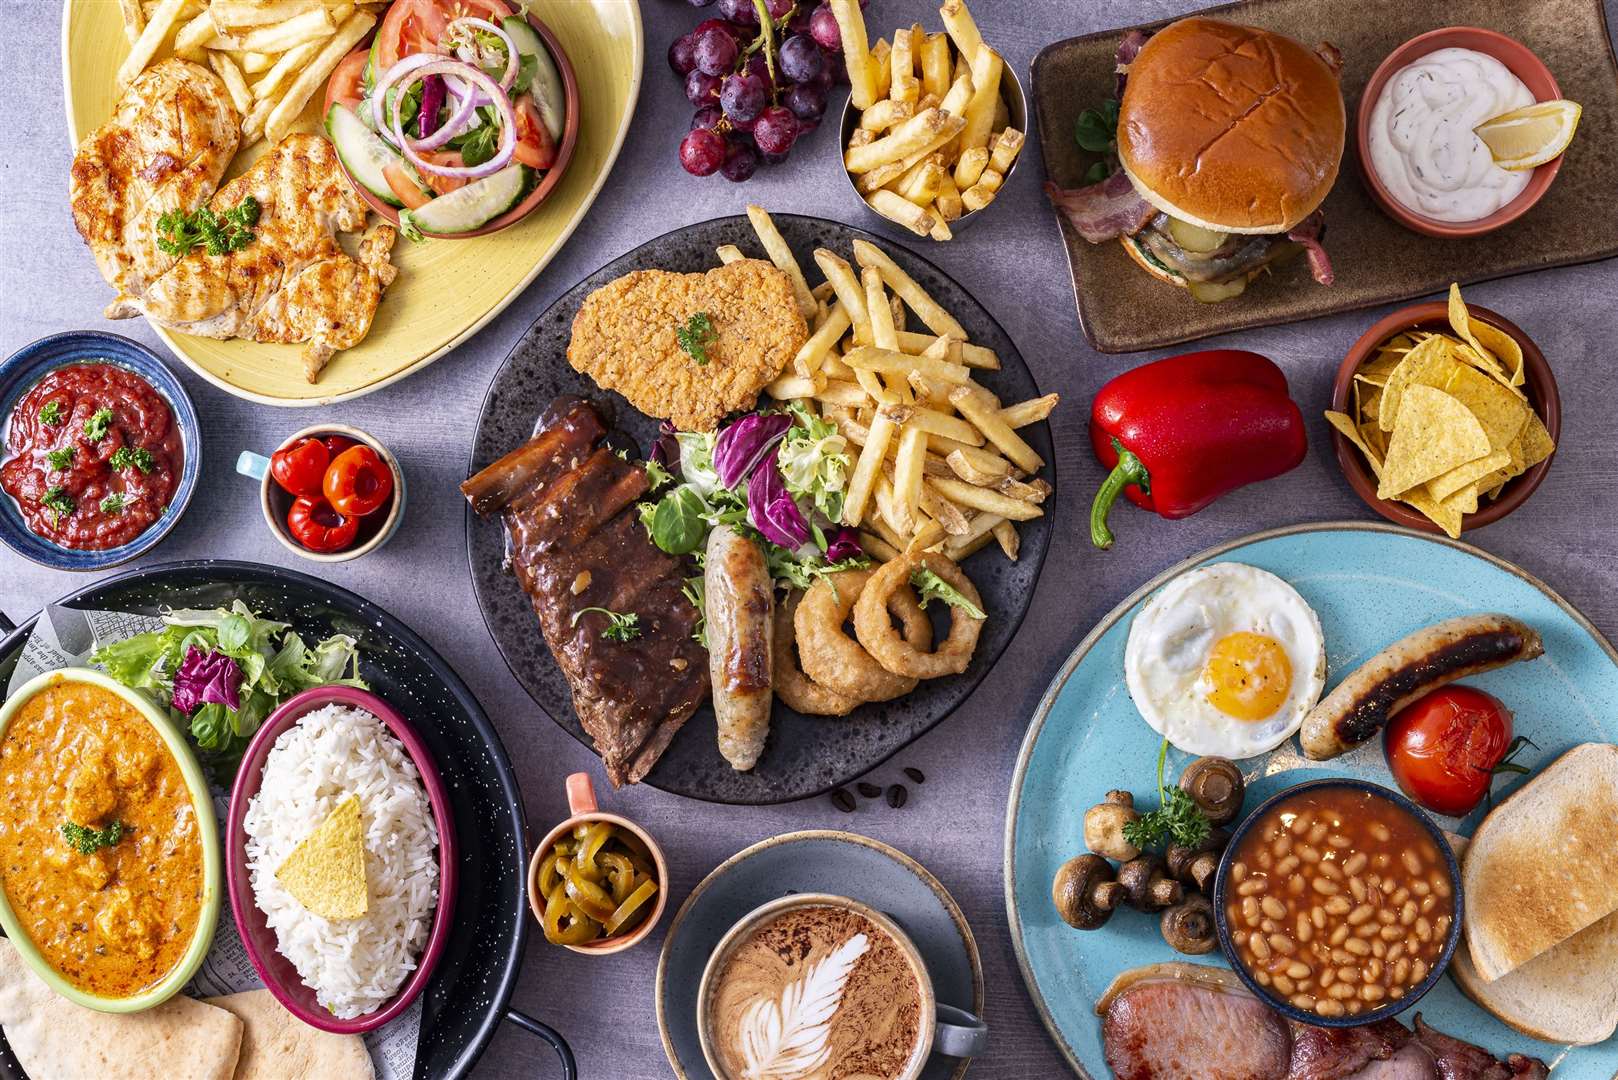 Get 20% off the food bill this July from Monday to Thursday at The Quills